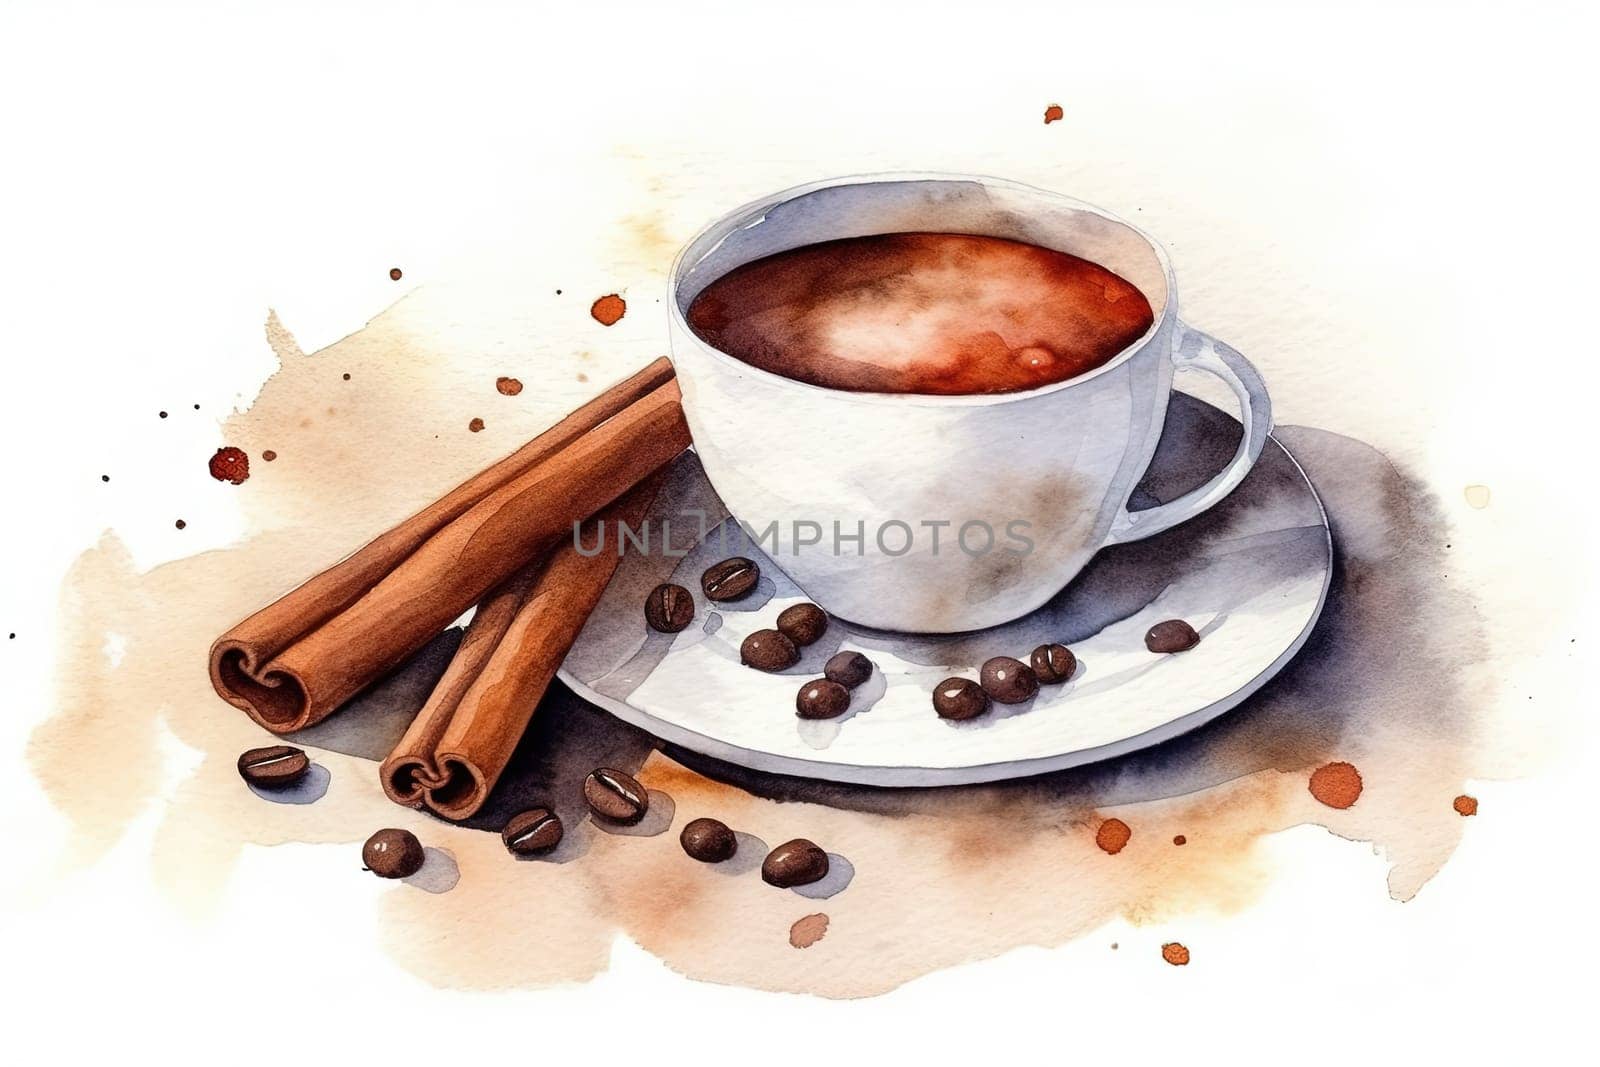 painting of cup with hot coffee drink with cinnamon and cloves by tan4ikk1